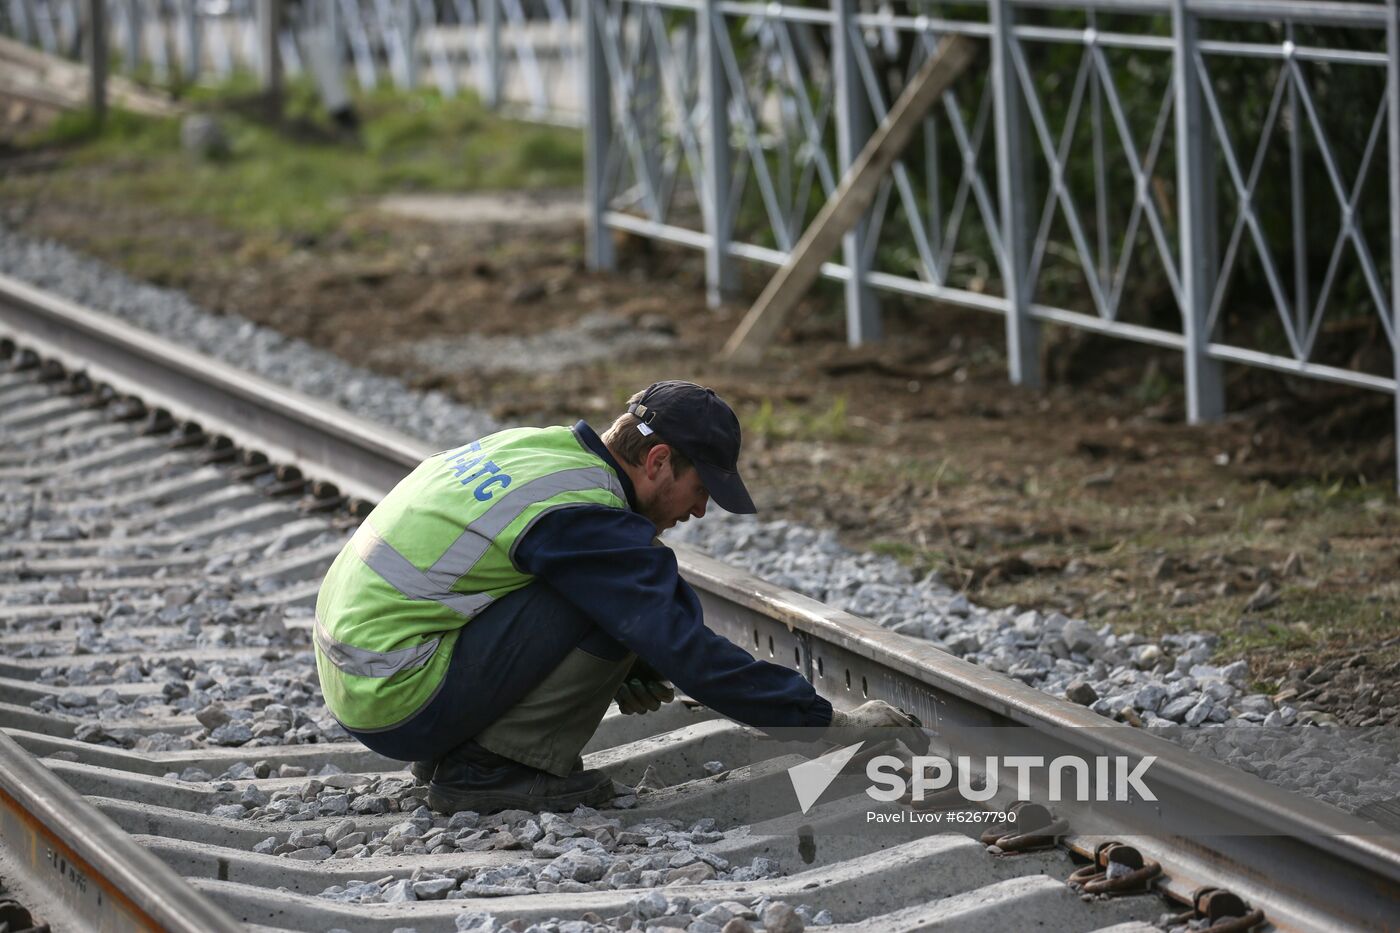 Russia Rail Link Reopening